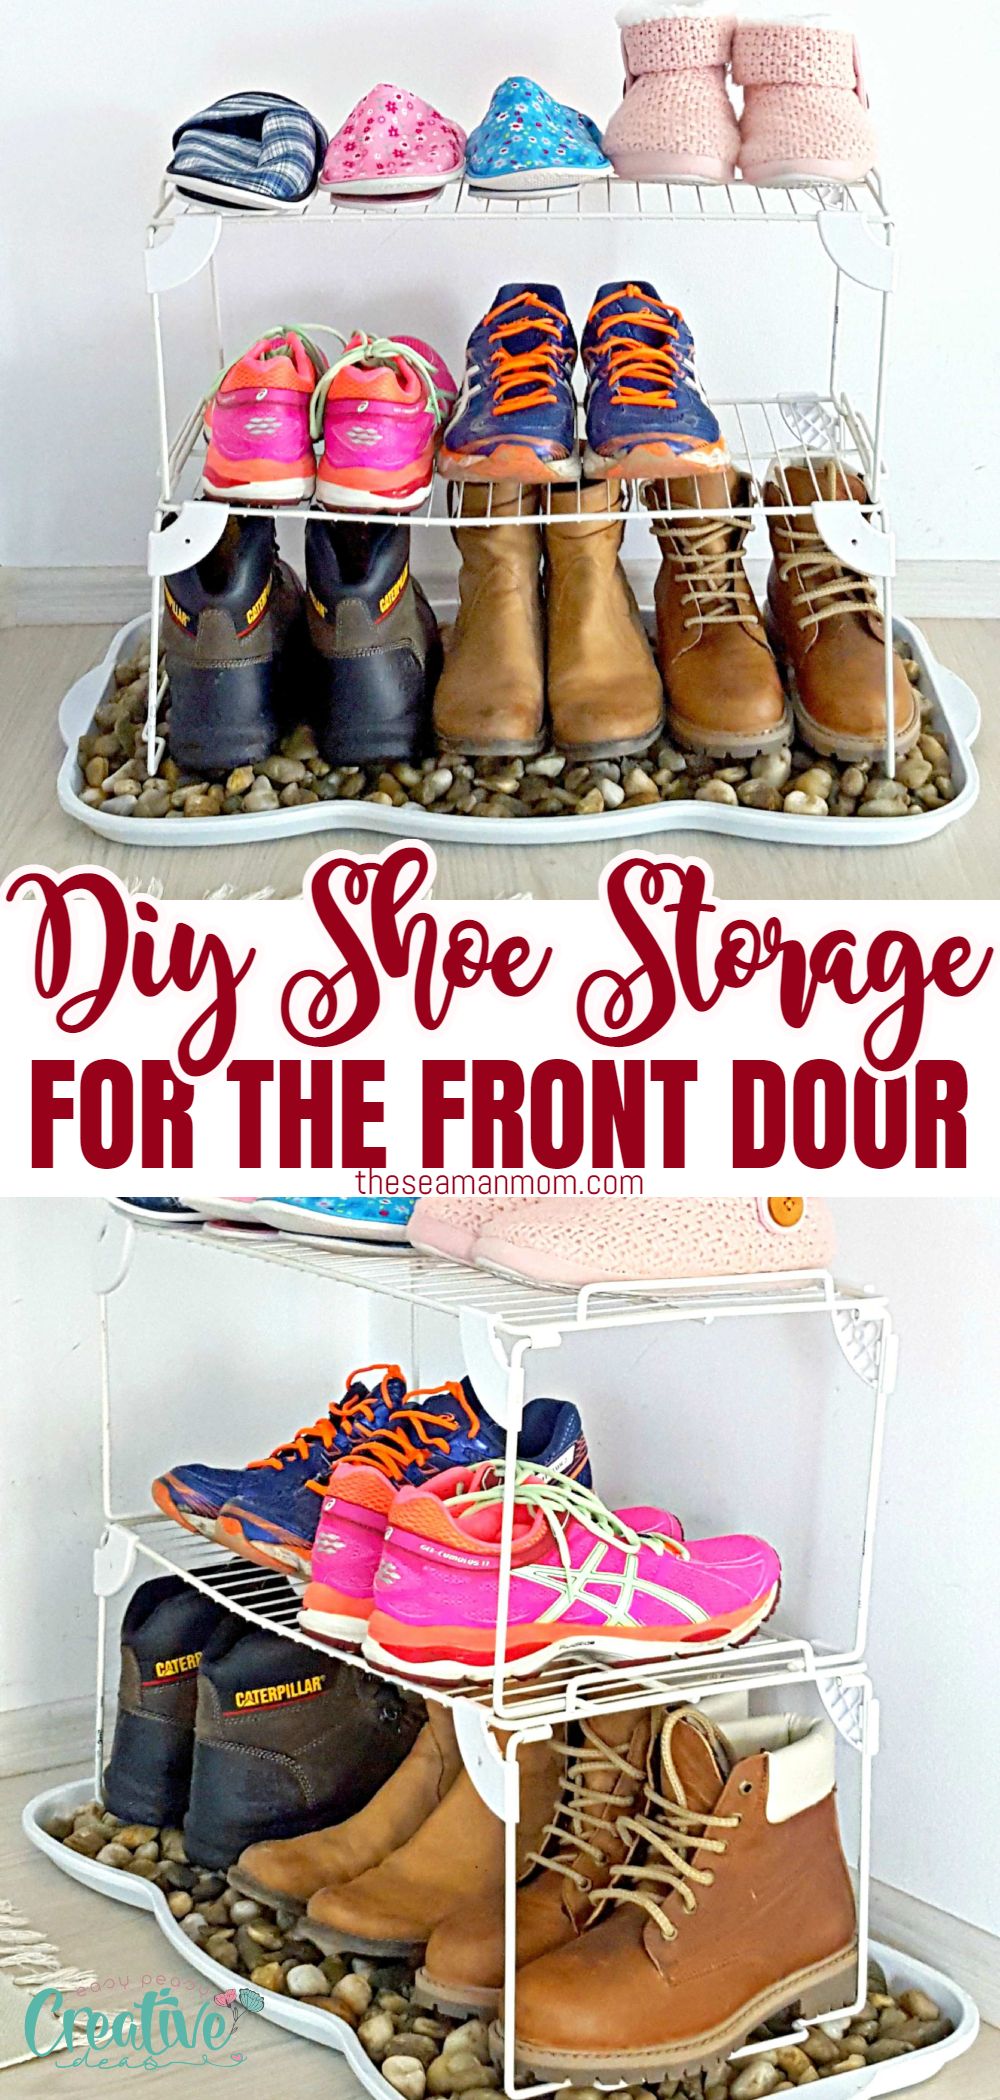 Transform your entryway with this DIY shoe storage idea! Easily make a shoe rack for snowy boots using an old boot tray and get the perfect front-door shoe storage solution today! via @petroneagu